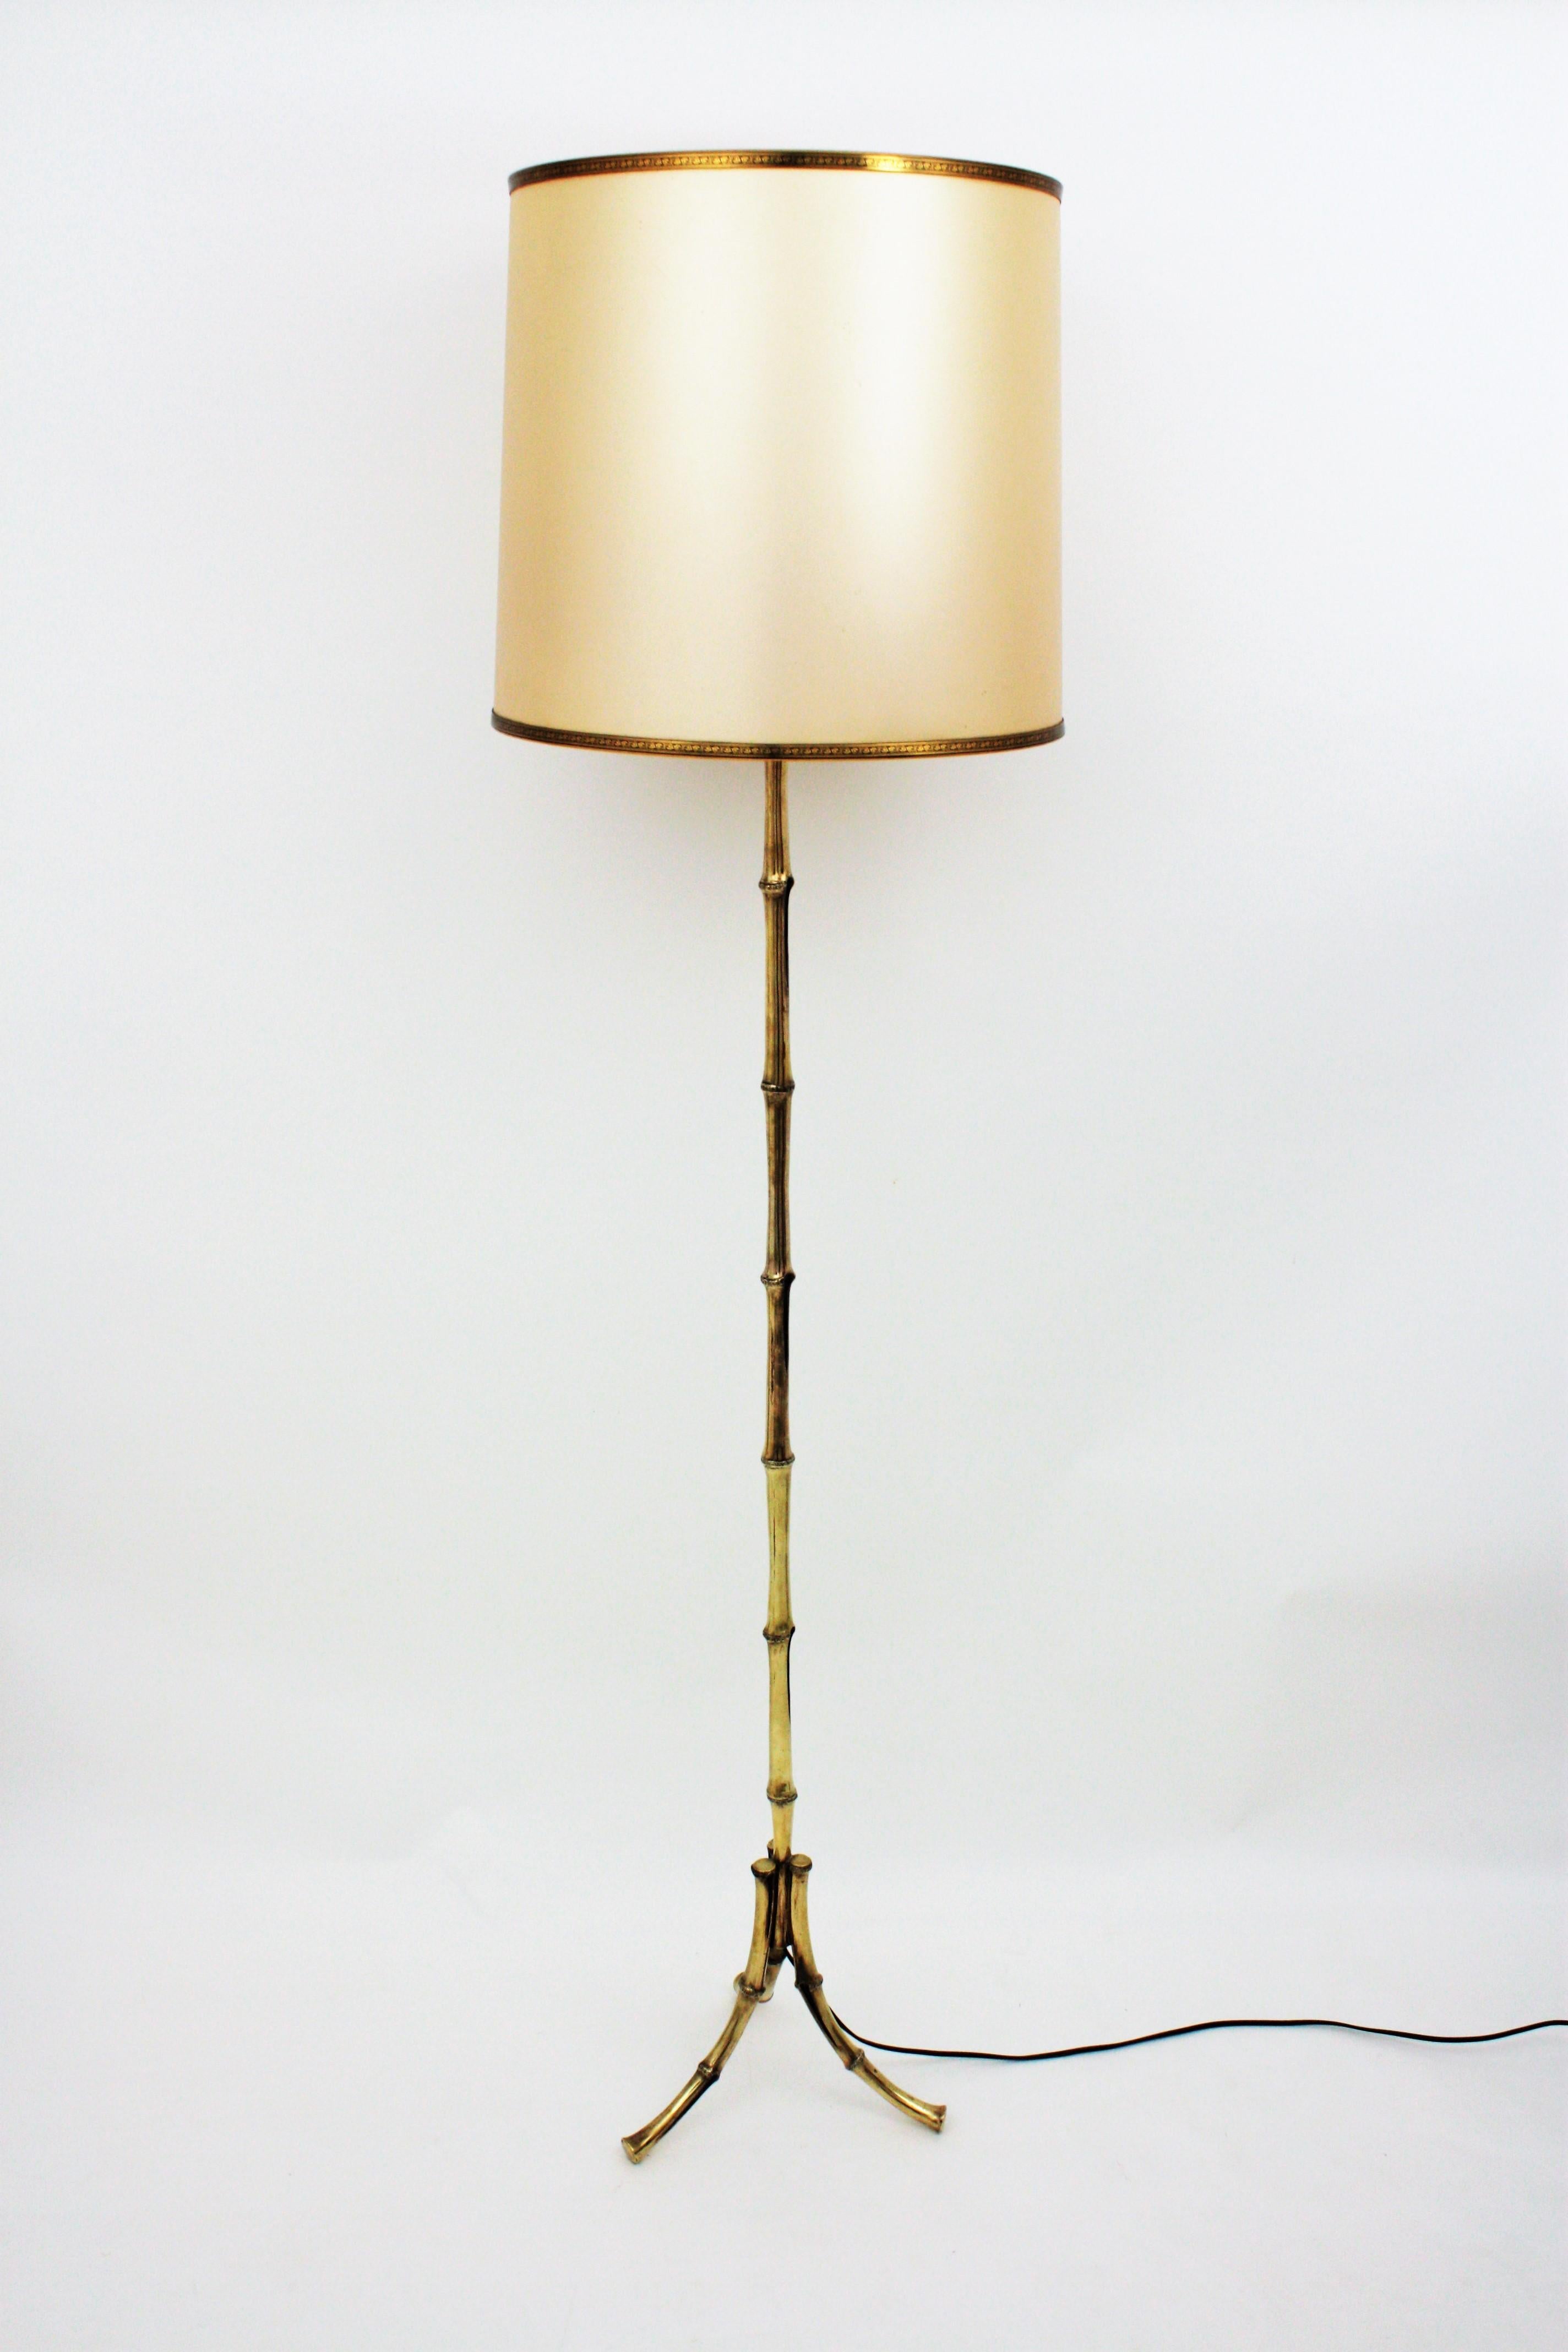 Elegant faux bamboo bronze floor lamp by Maison Baguès. France, 1950s.
Faux bamboo legs rising up to a triple canopy just under the shade.
It has three lights: a double light down socket and one upward white lacquered metal diffusor for a third